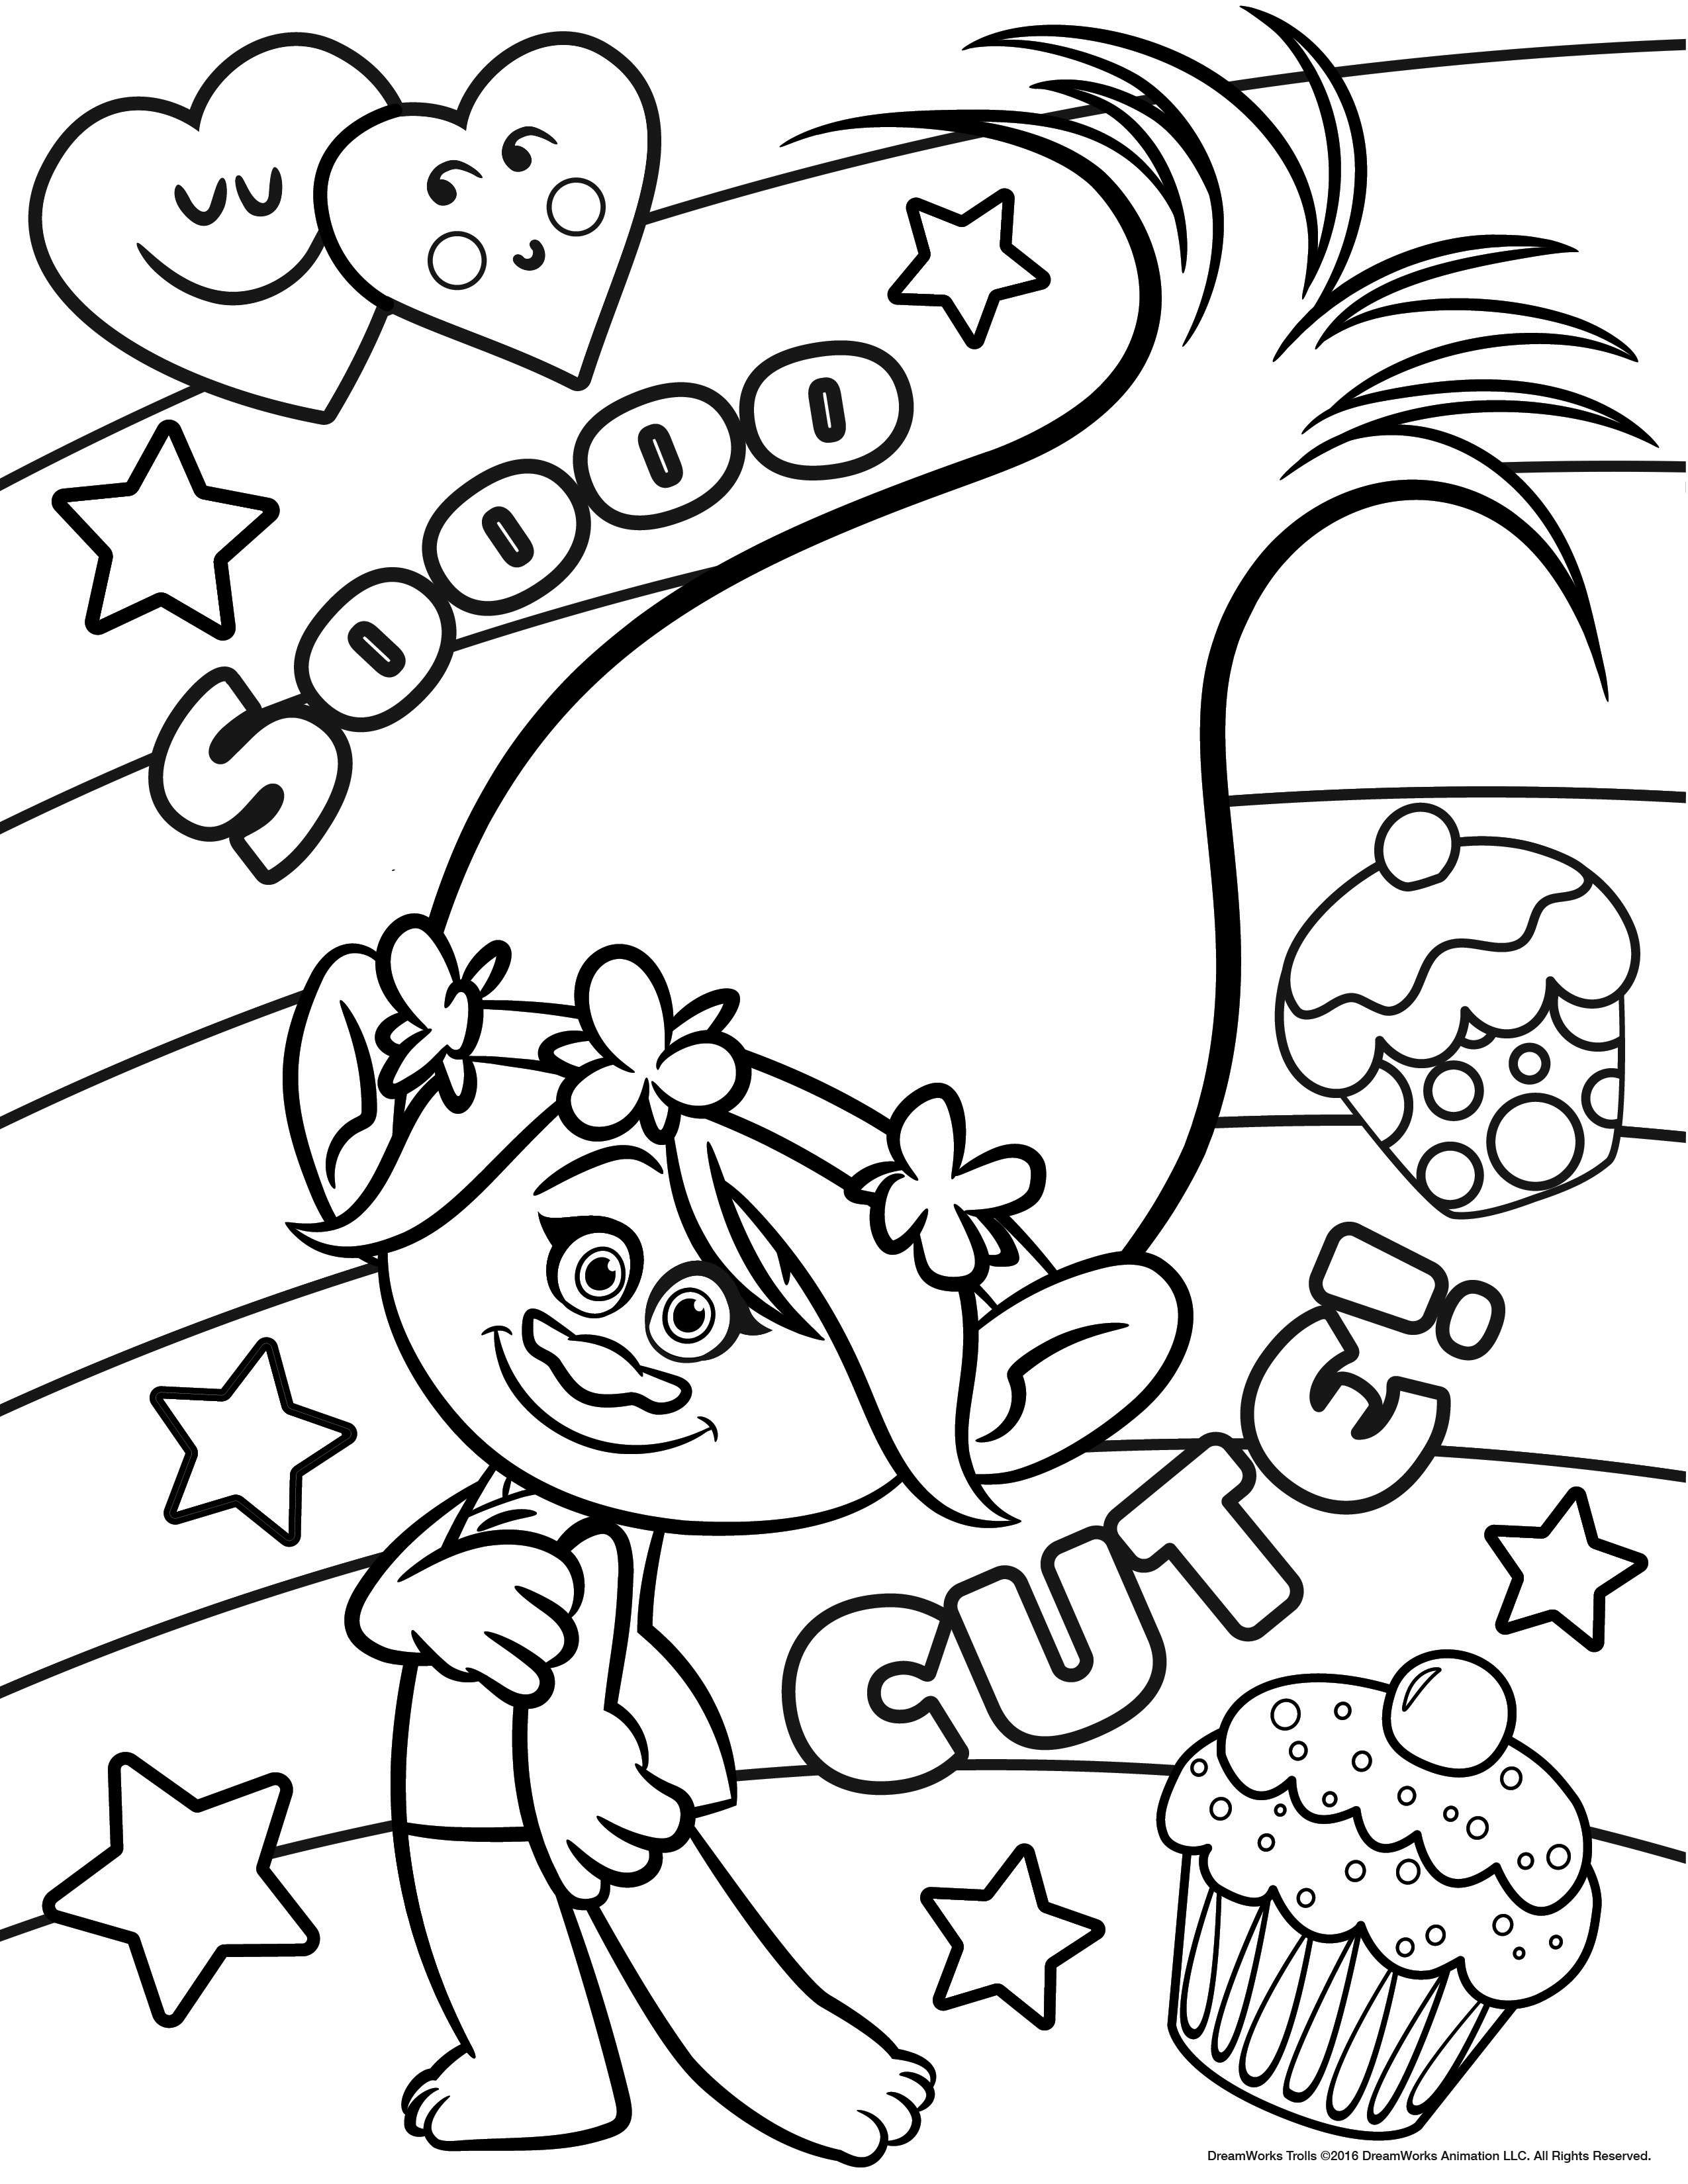 'Sooo Cute! Poppy from the Trolls: print and color now!